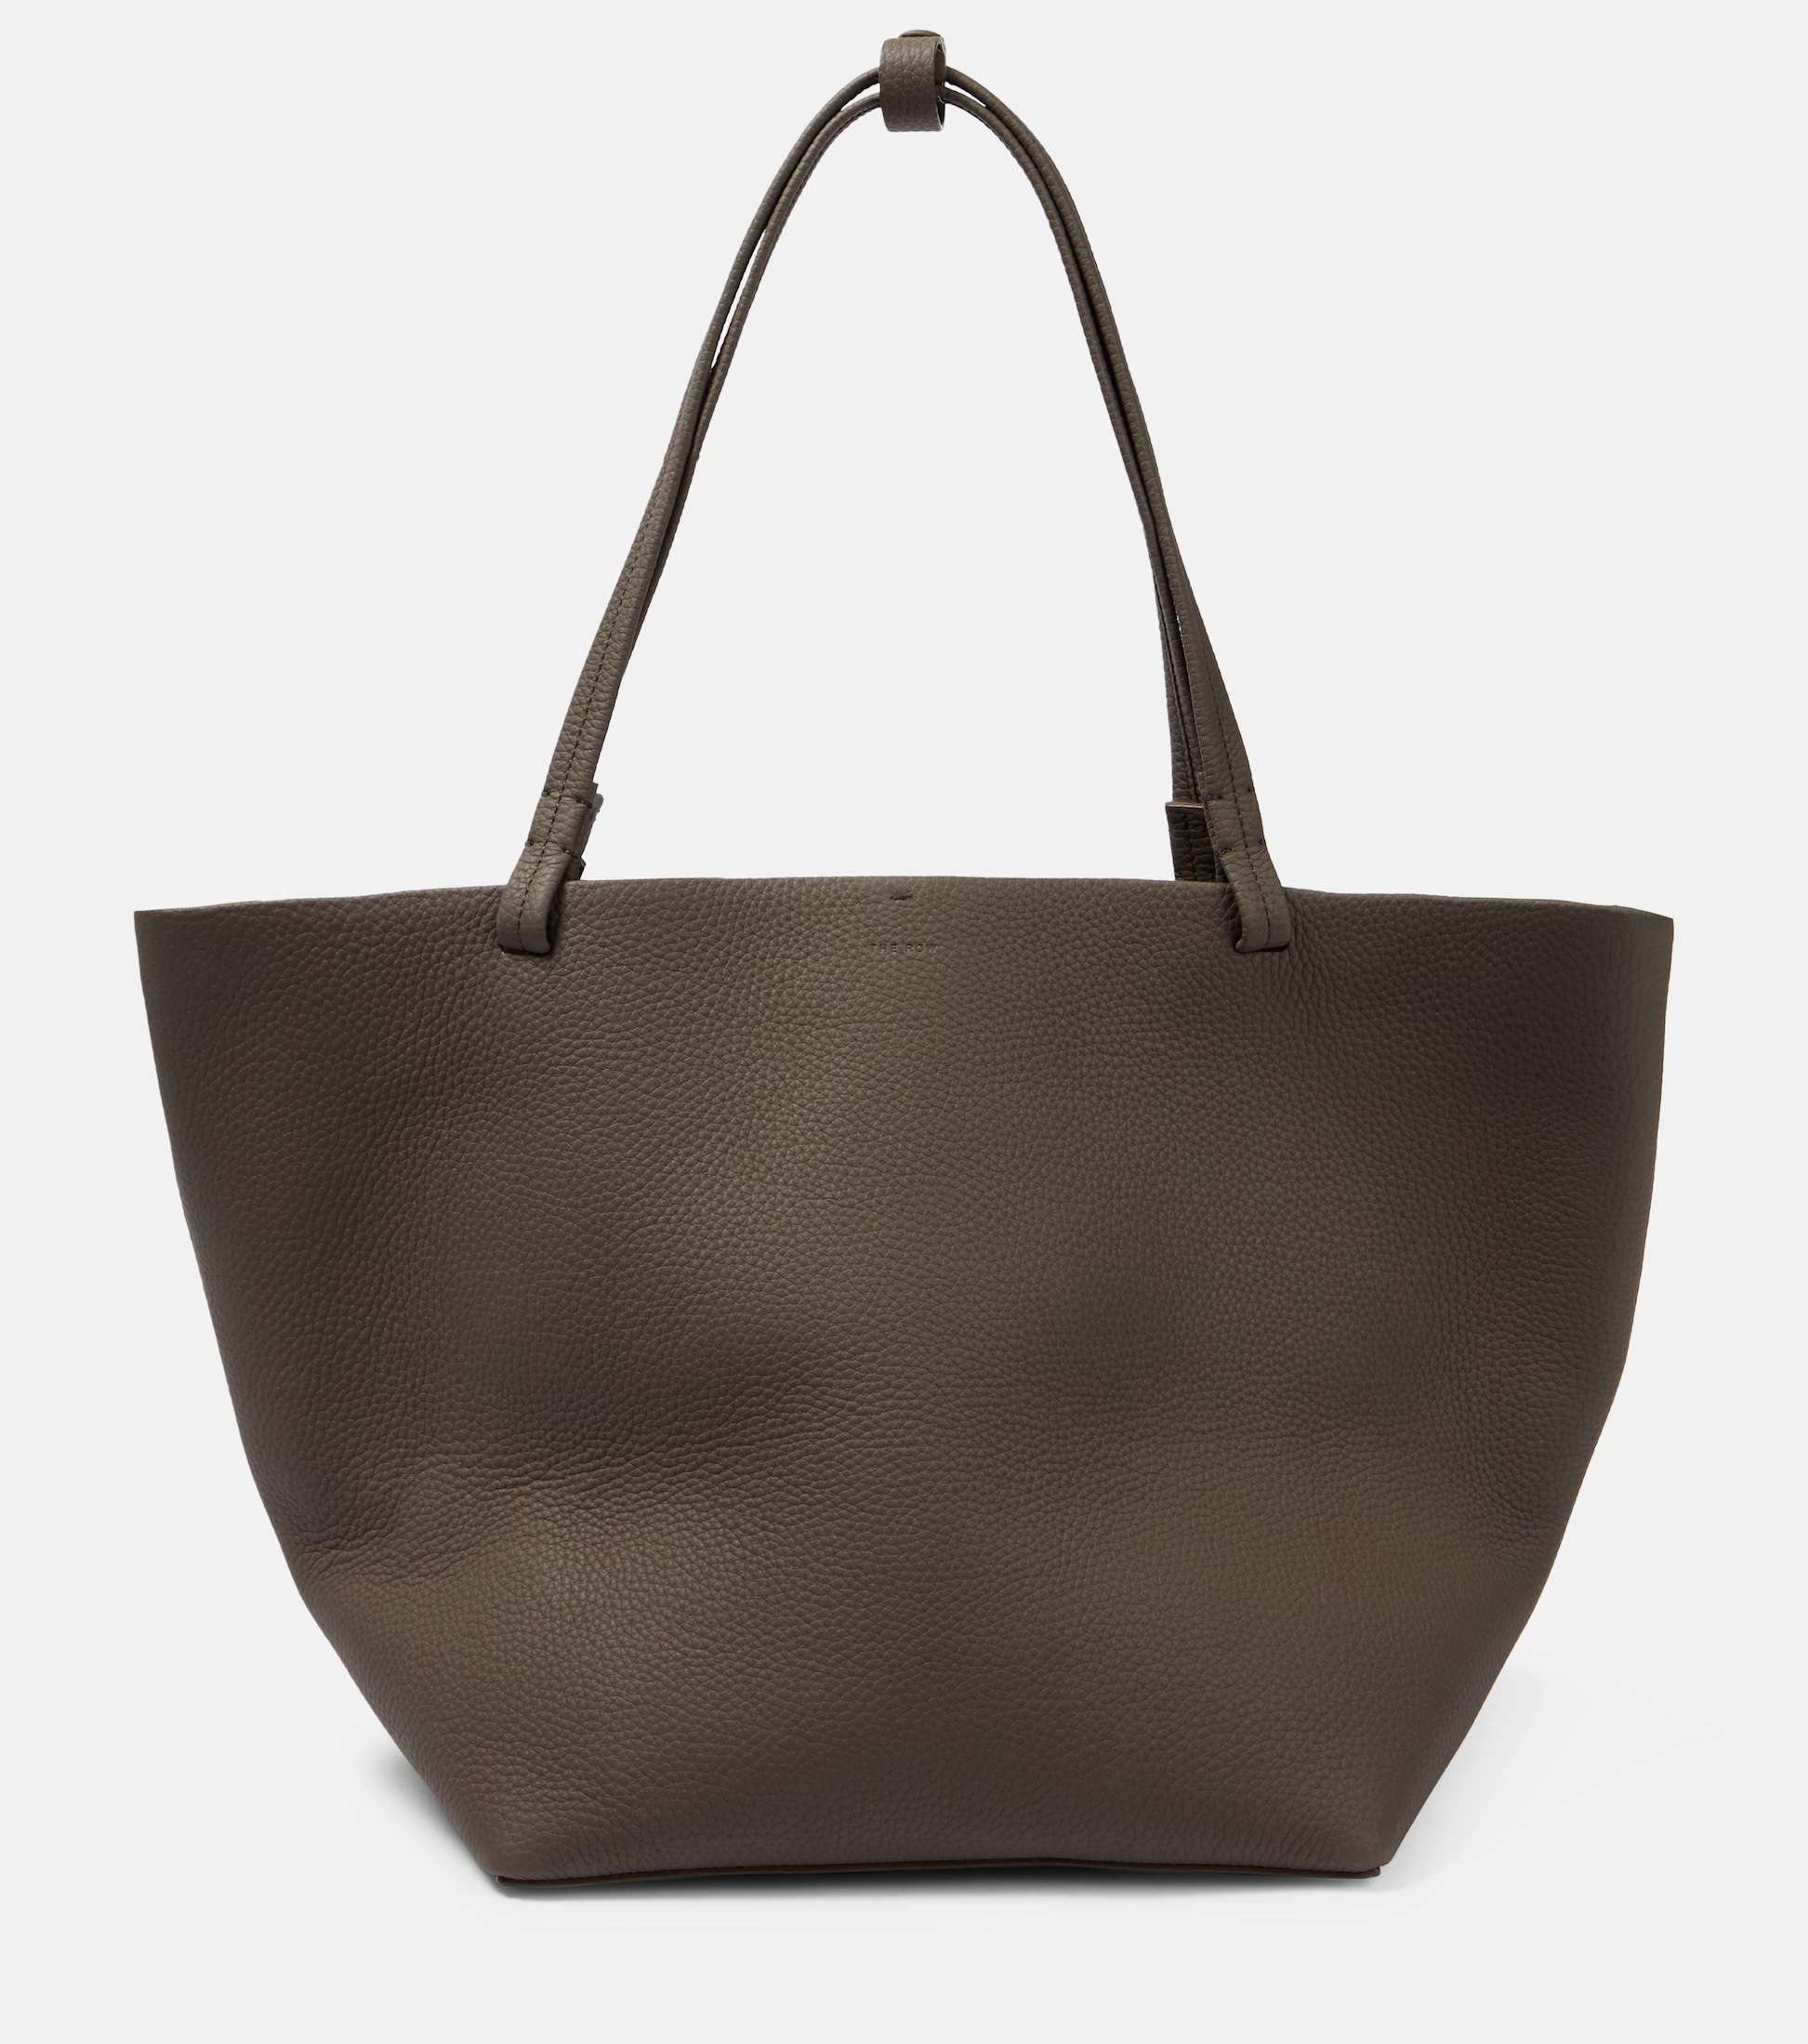 The Row Park Tote